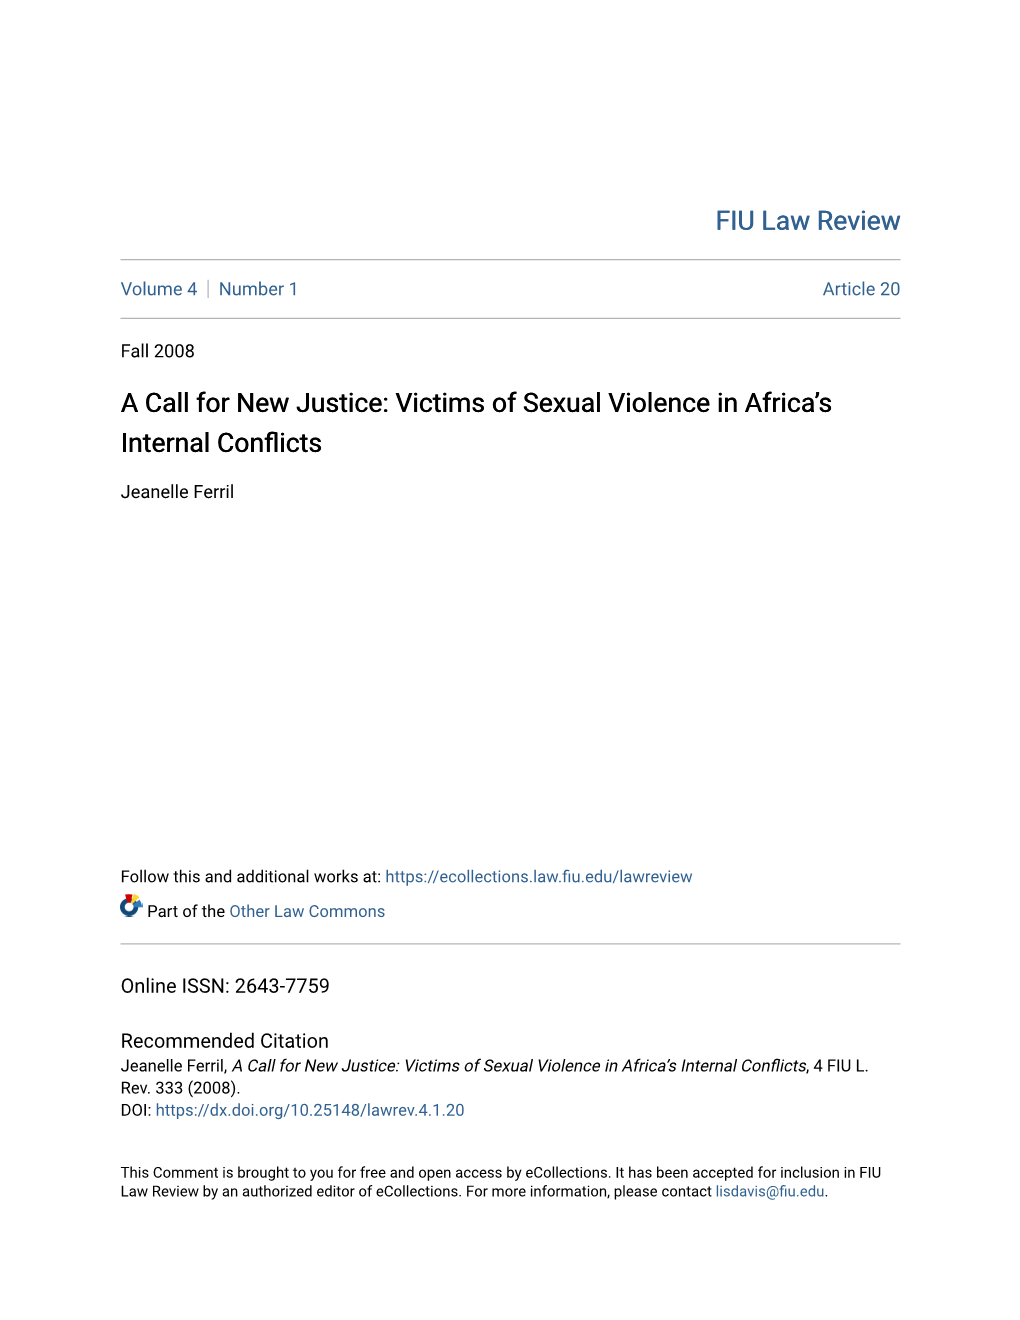 Victims of Sexual Violence in Africaâ•Žs Internal Conflicts